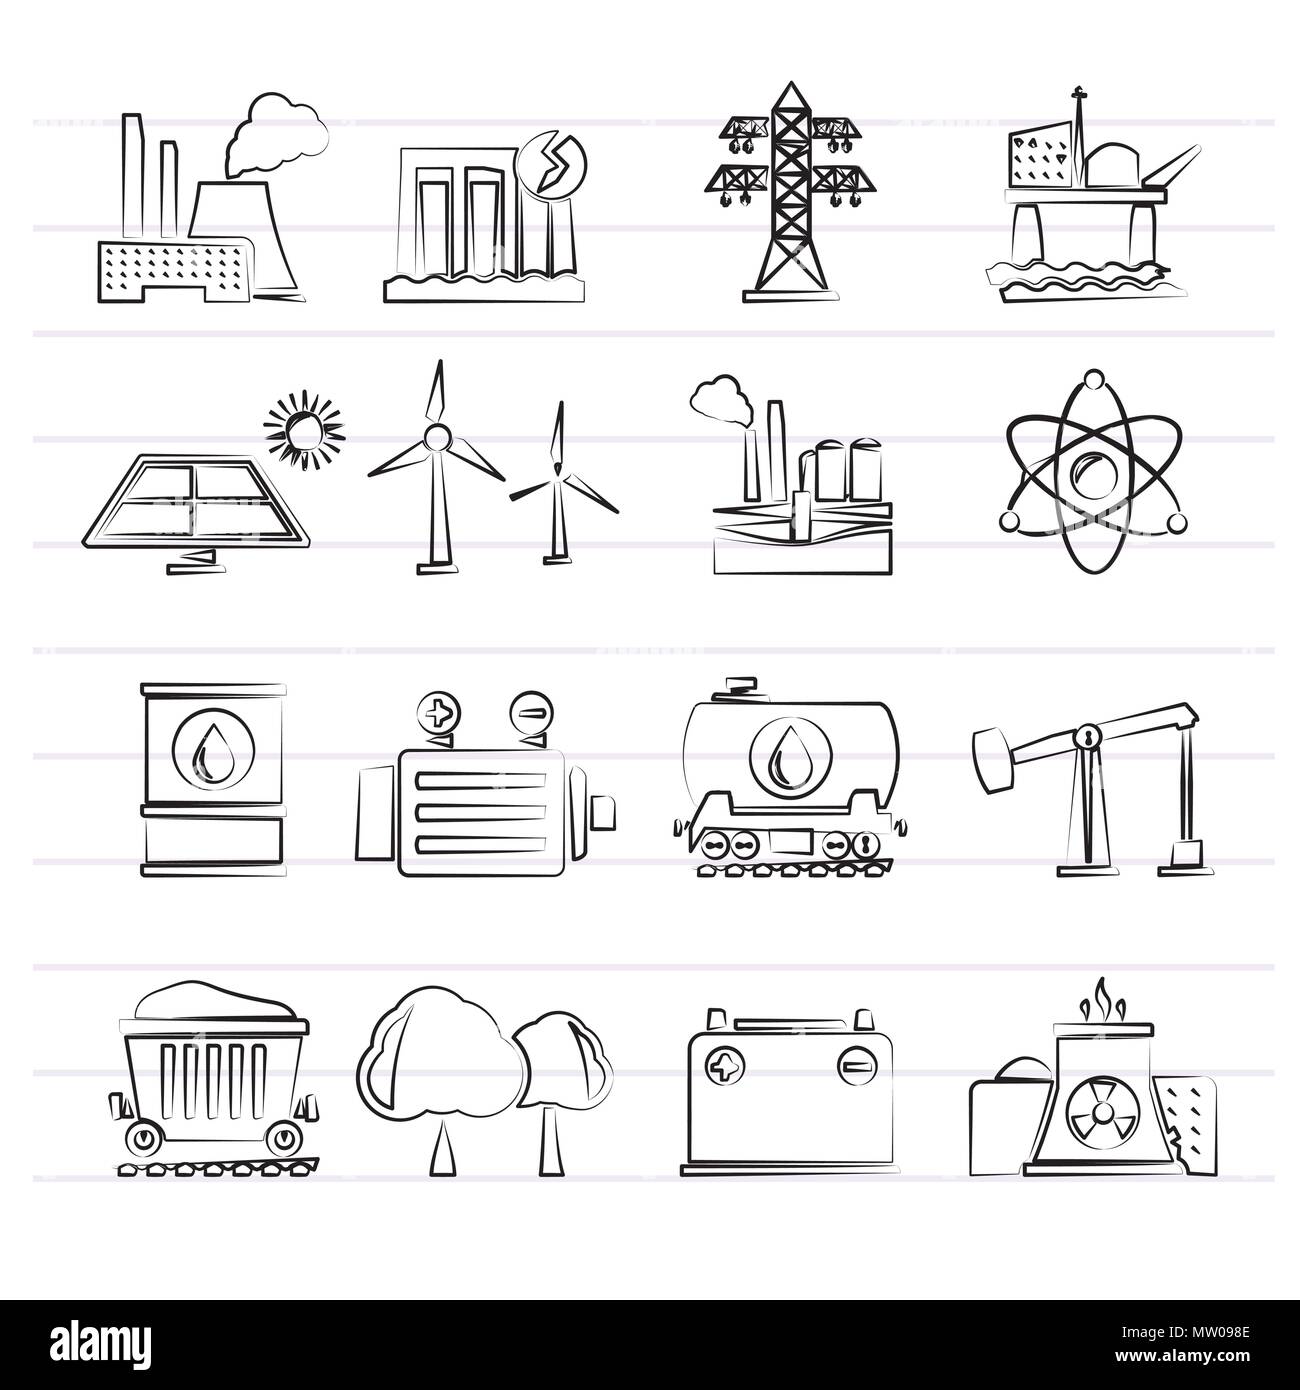 Energy producing industry and resources icons - vector icon set Stock Vector